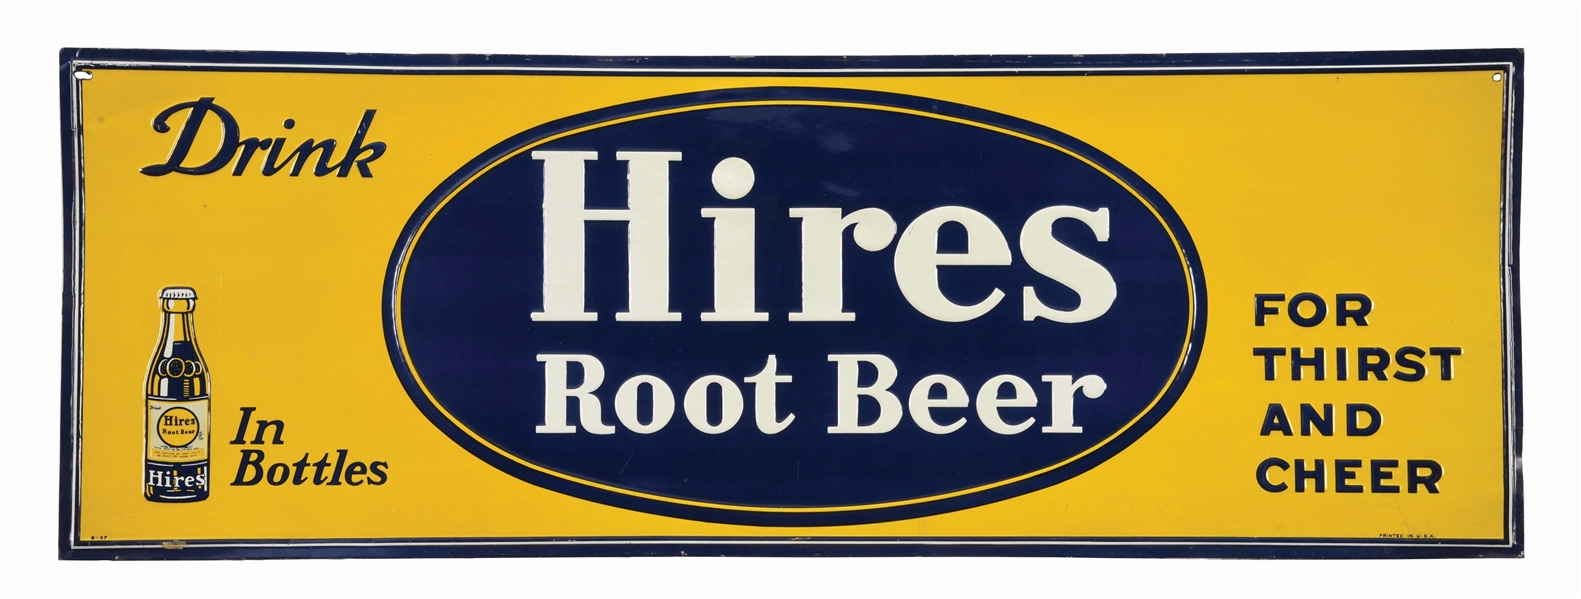 "DRINK HIRES ROOT BEER" EMBOSSED TIN SIGN.